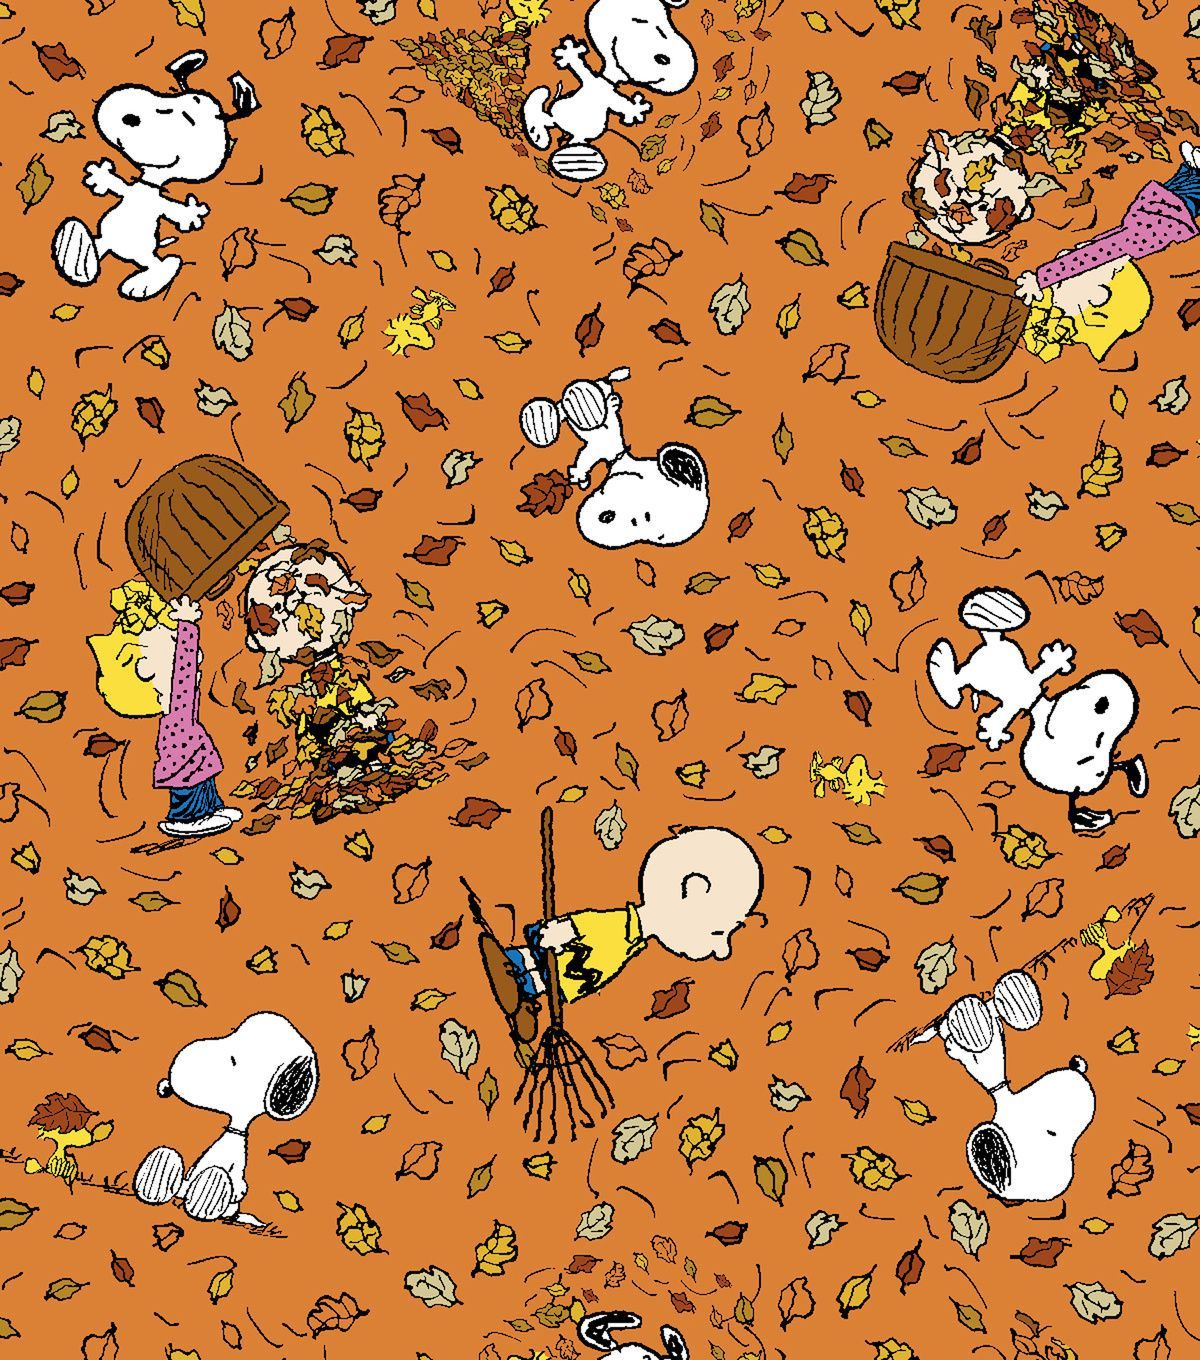 Harvest Cotton Fabric 43 Peanuts Falling Leaves. Snoopy Wallpaper, Snoopy, Thanksgiving Wallpaper